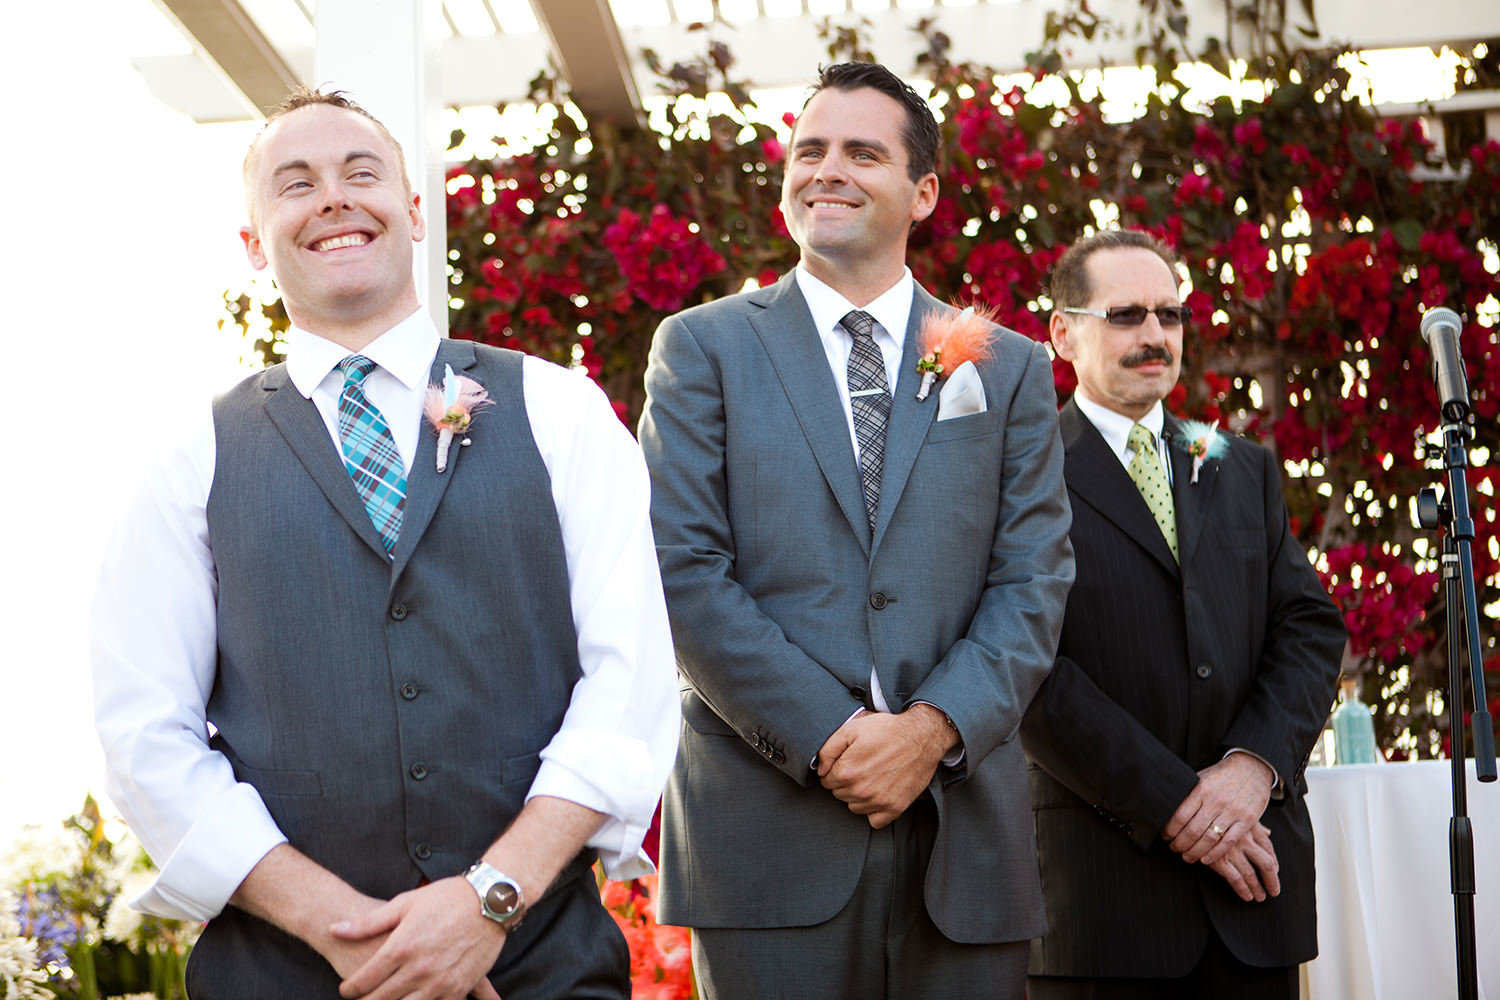 groom smiling while bride walks down the aisle